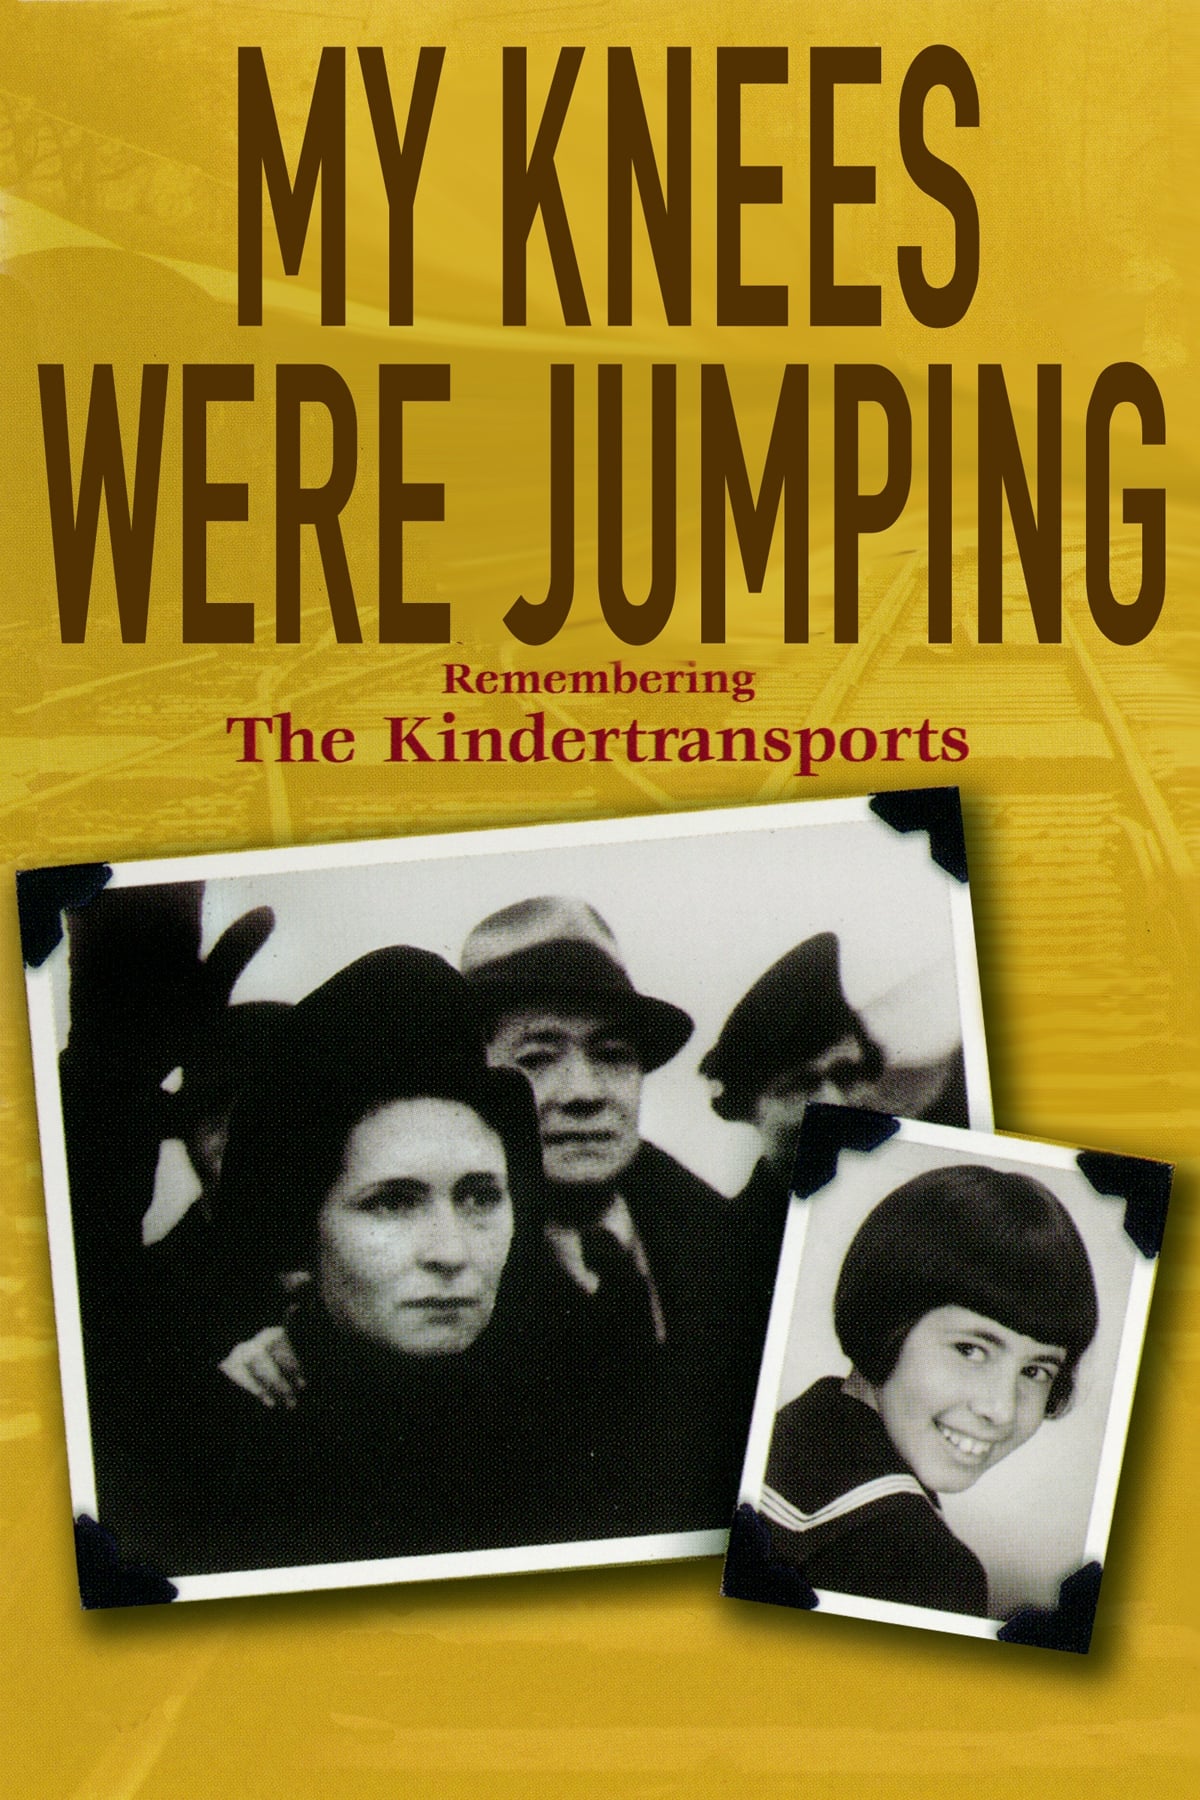 My Knees were Jumping: Remembering the Kindertransports